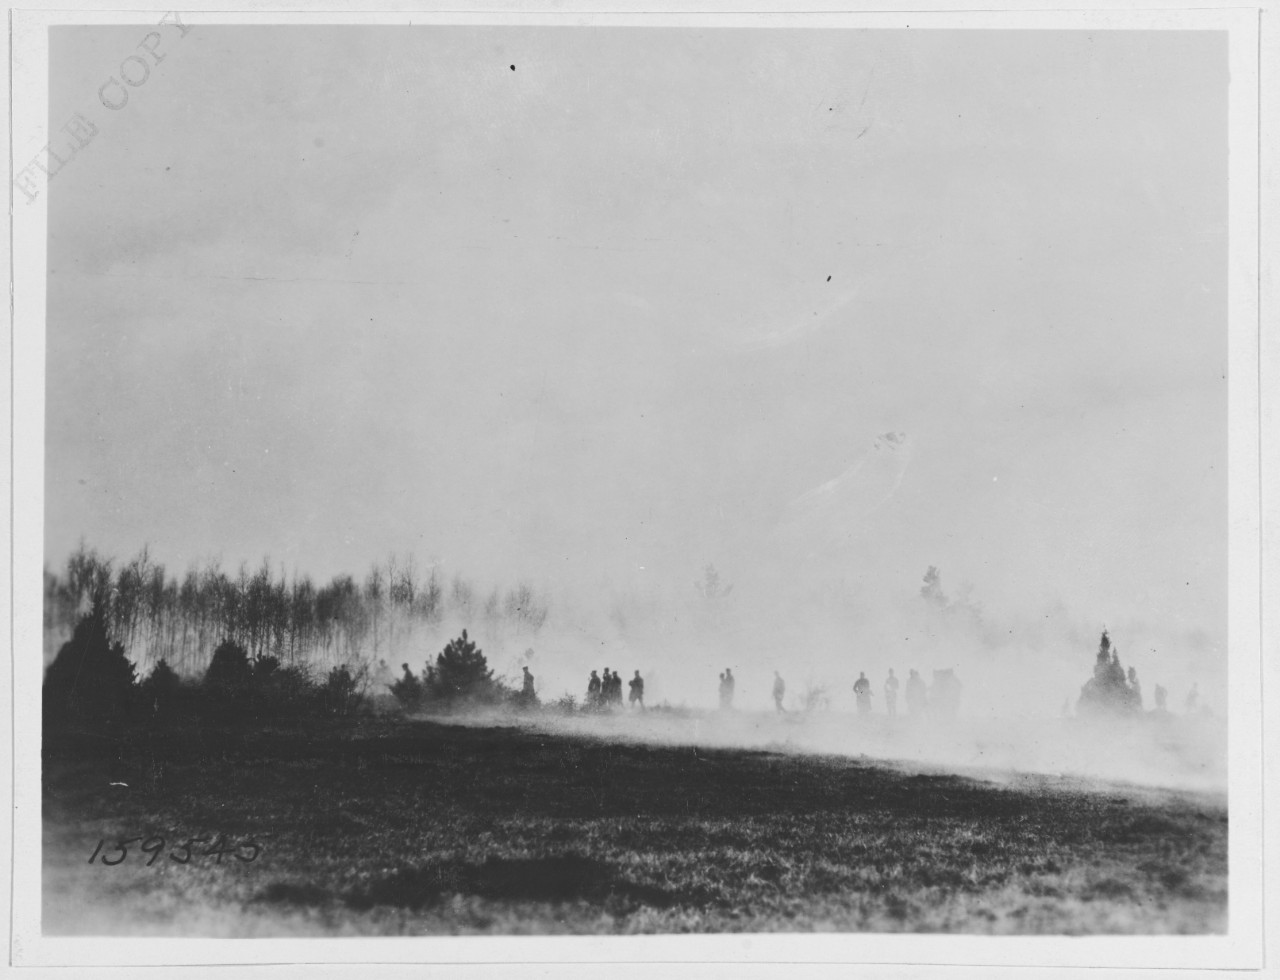 Gas attacks, 1st Division, U.S. Army in smoke screen. Virges, Germany. May 10, 1918